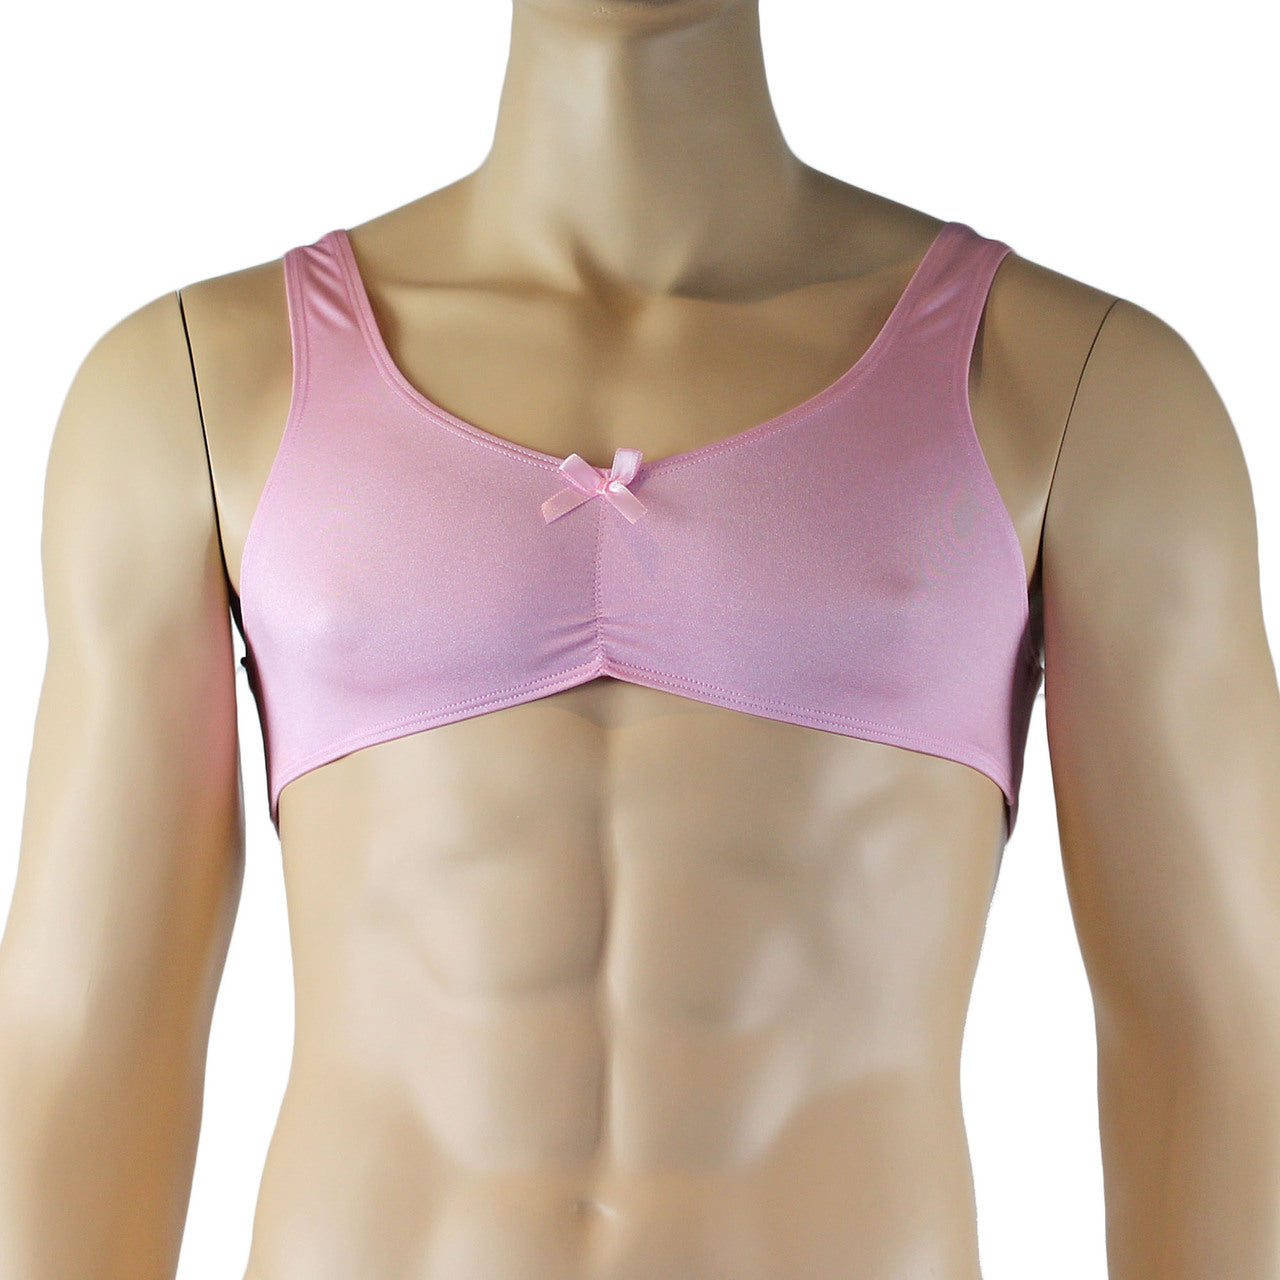 Male Angel Stretch Spandex Bra Top with Bow Pink